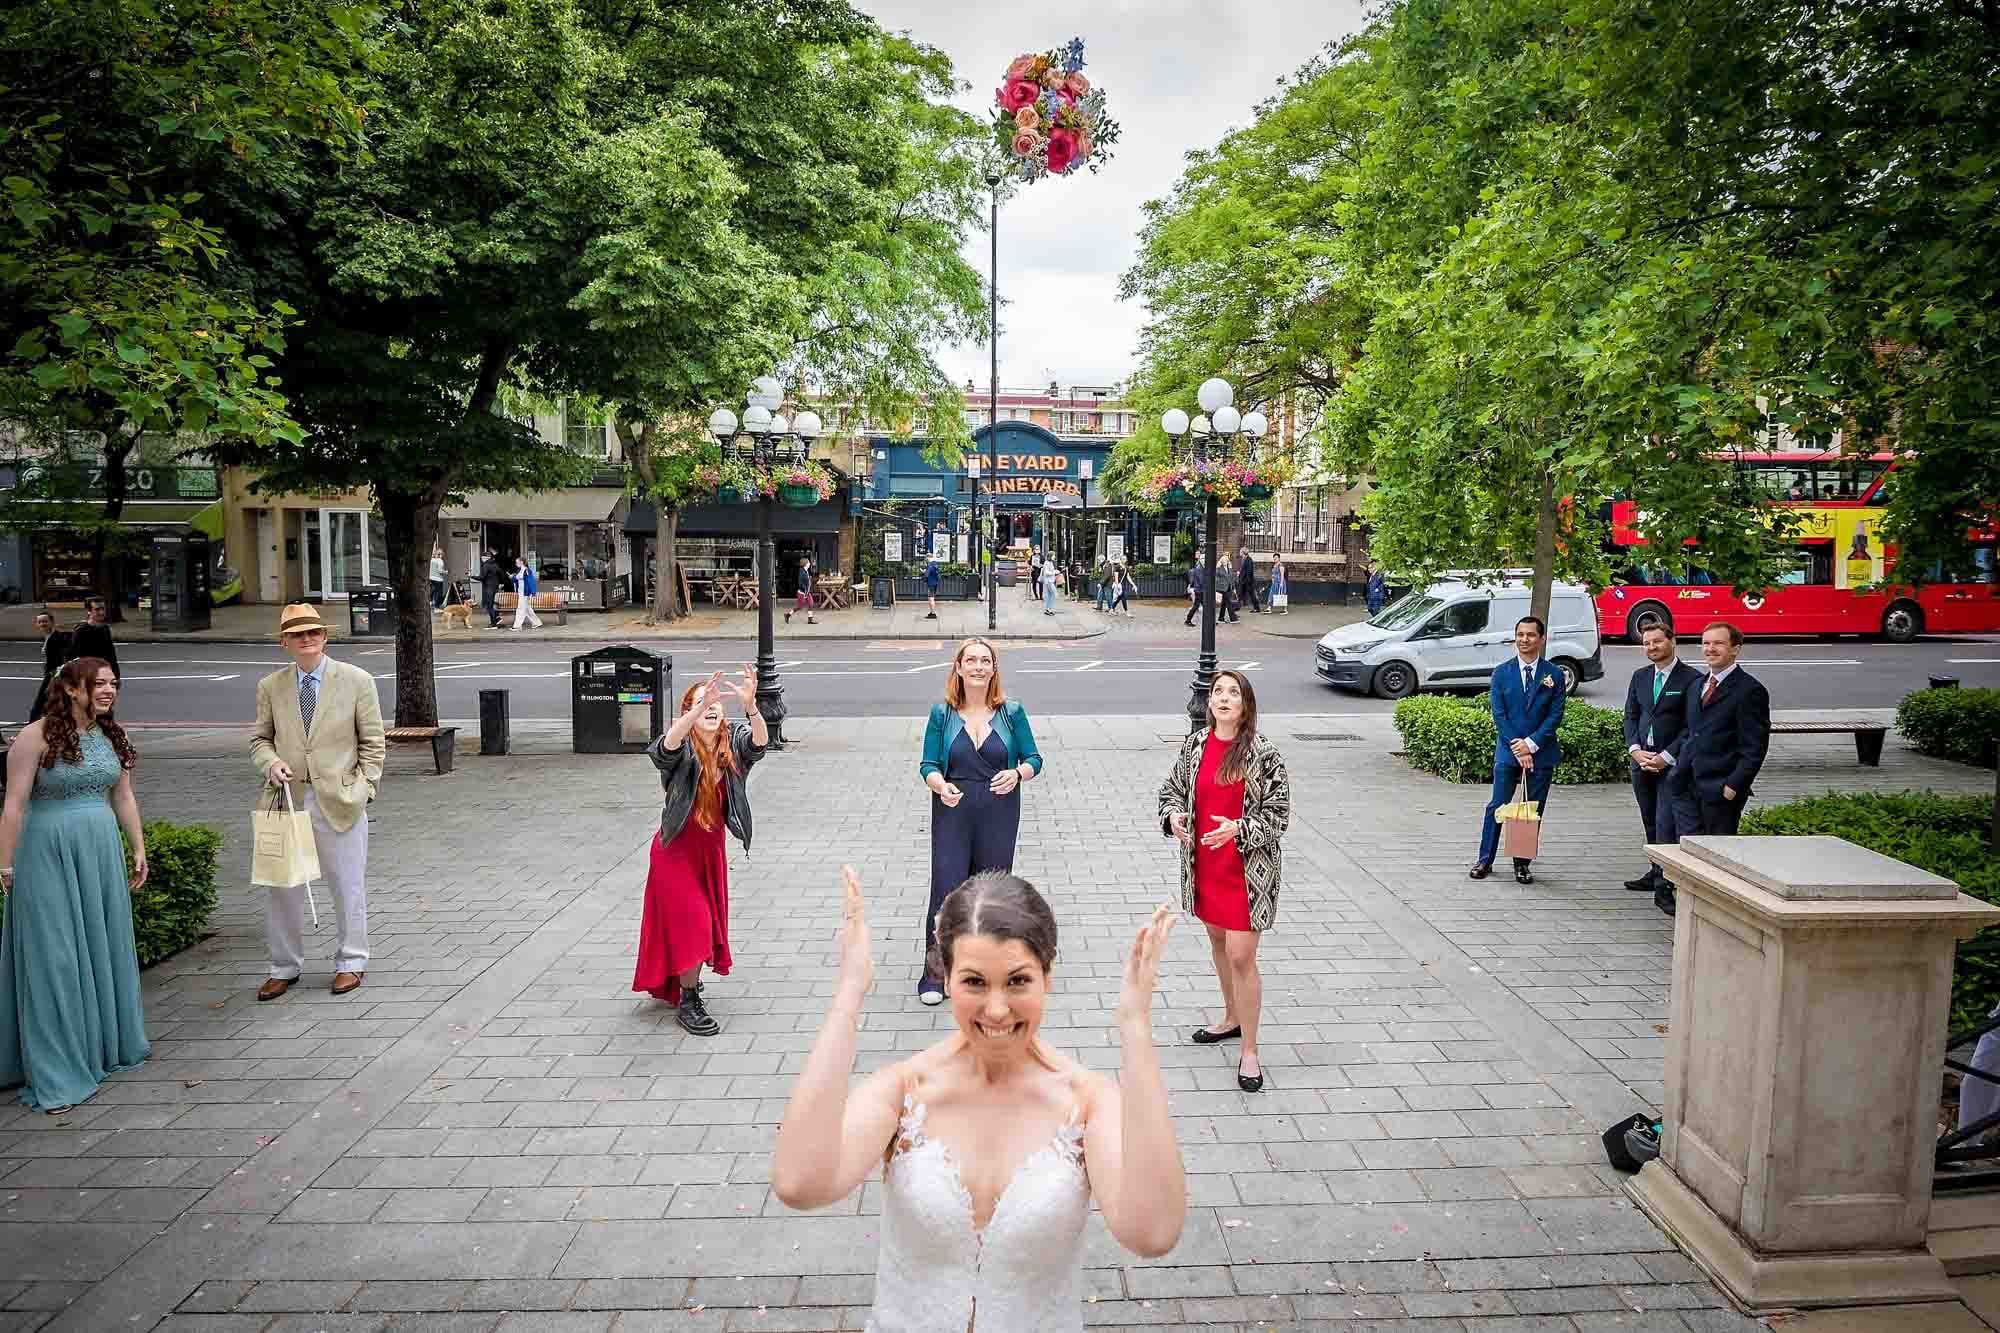 The bride happily tosses her bouquet over her head as three friends try to catch it.